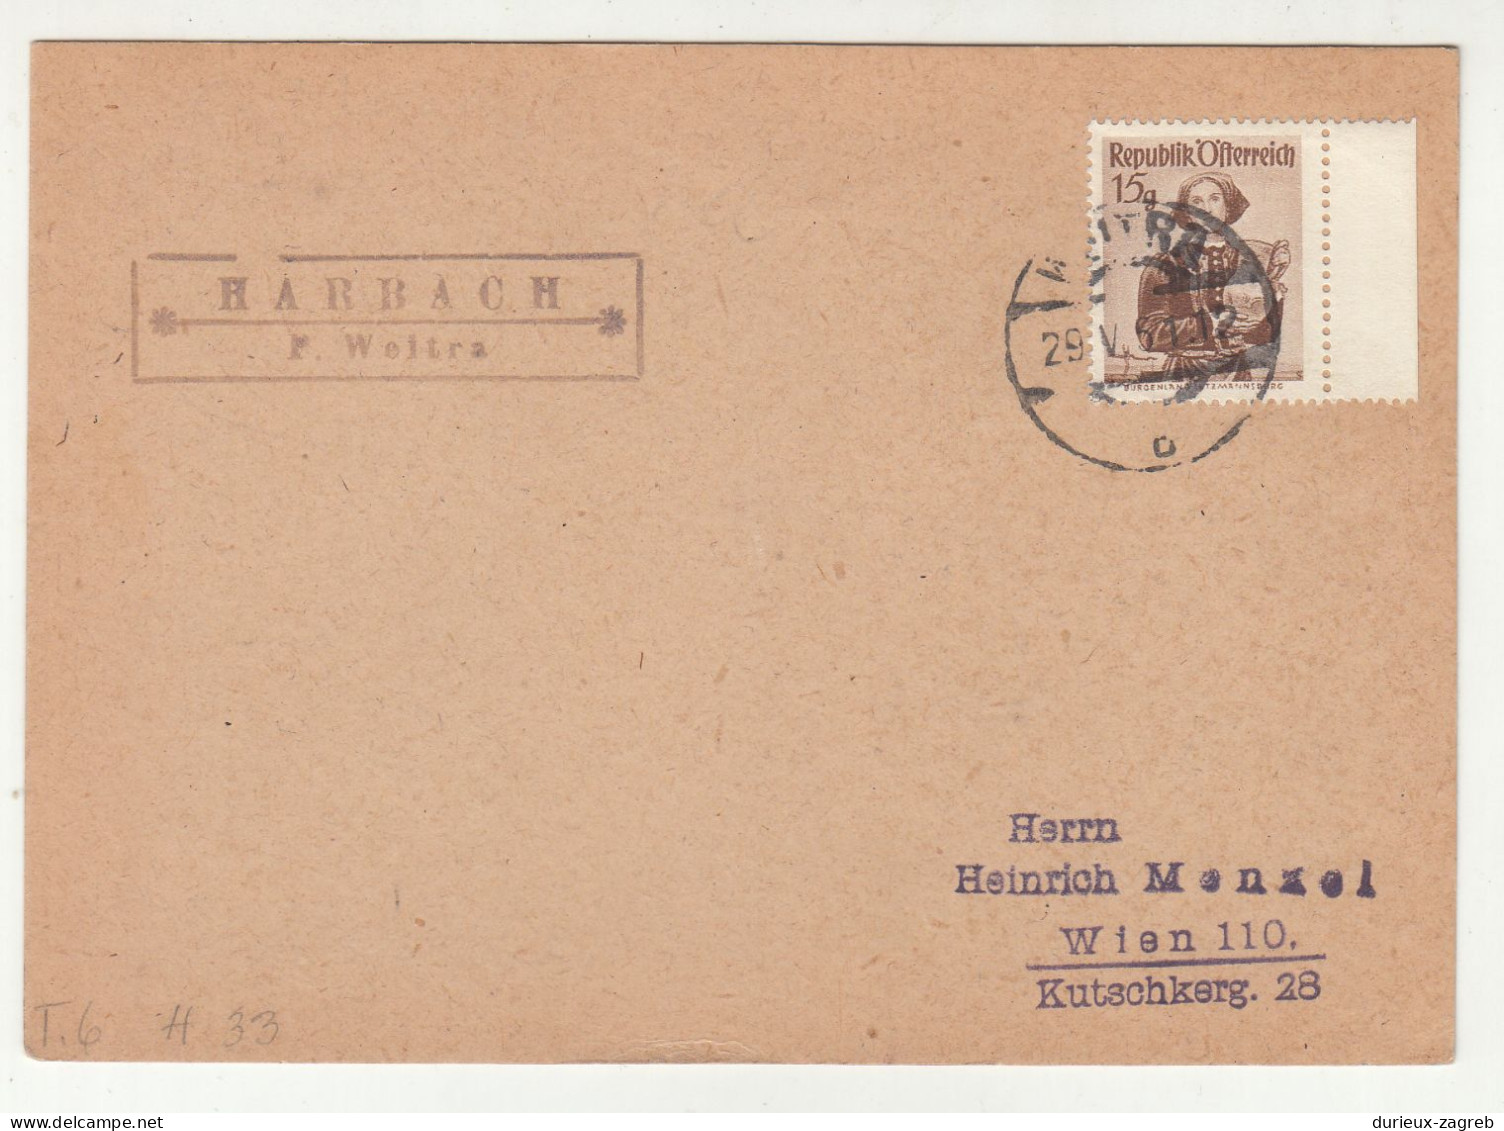 Harbach P. Weitra Mark On Card Posted? 1961 B240401 - Covers & Documents